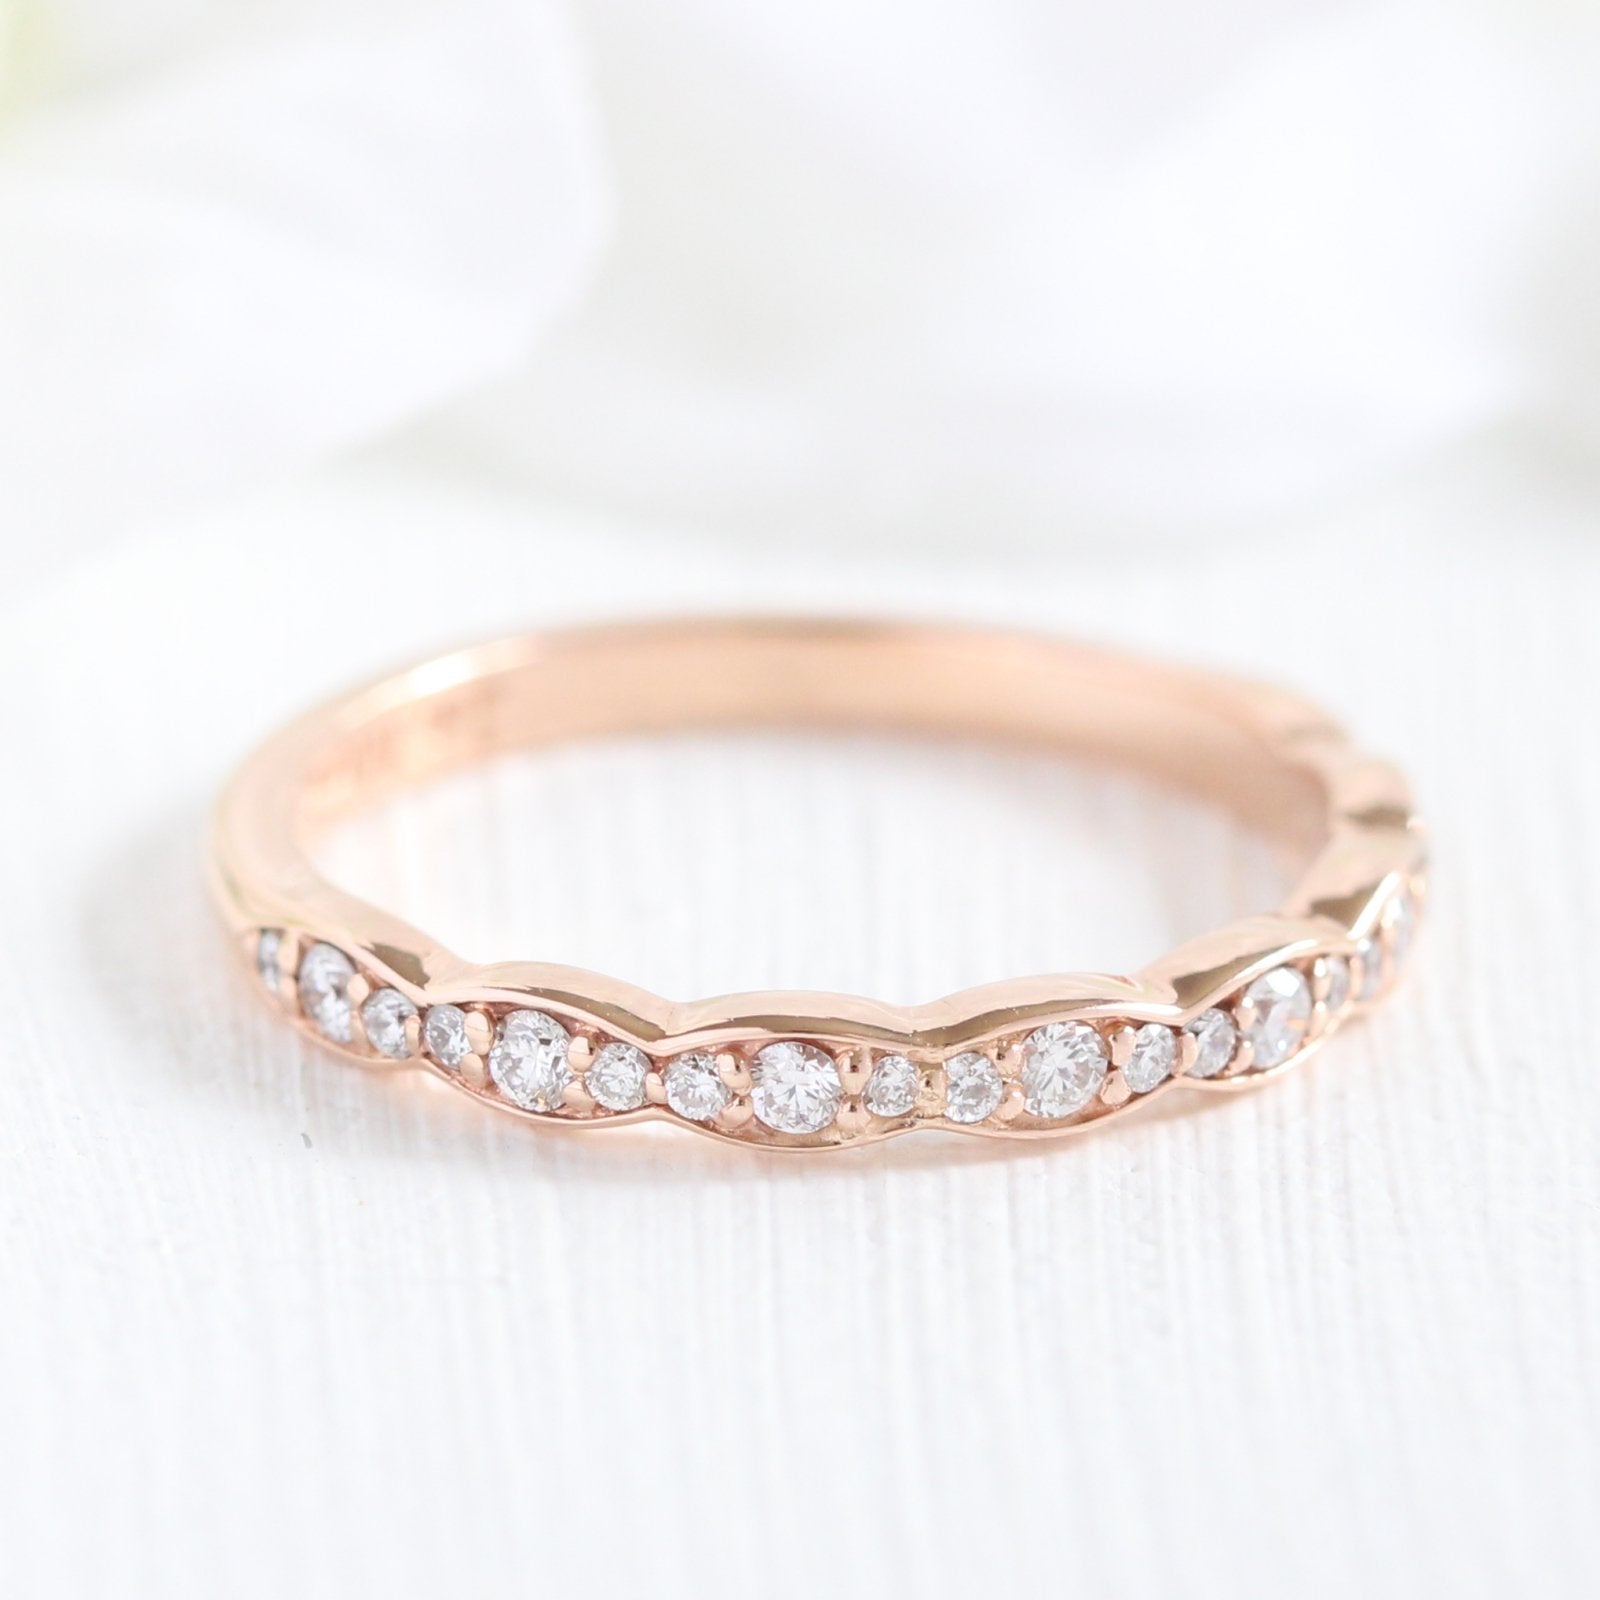 oval morganite engagement ring in rose gold vintage inspired band by la more designHalf diamond wedding ring rose gold scalloped band la more design jewelry